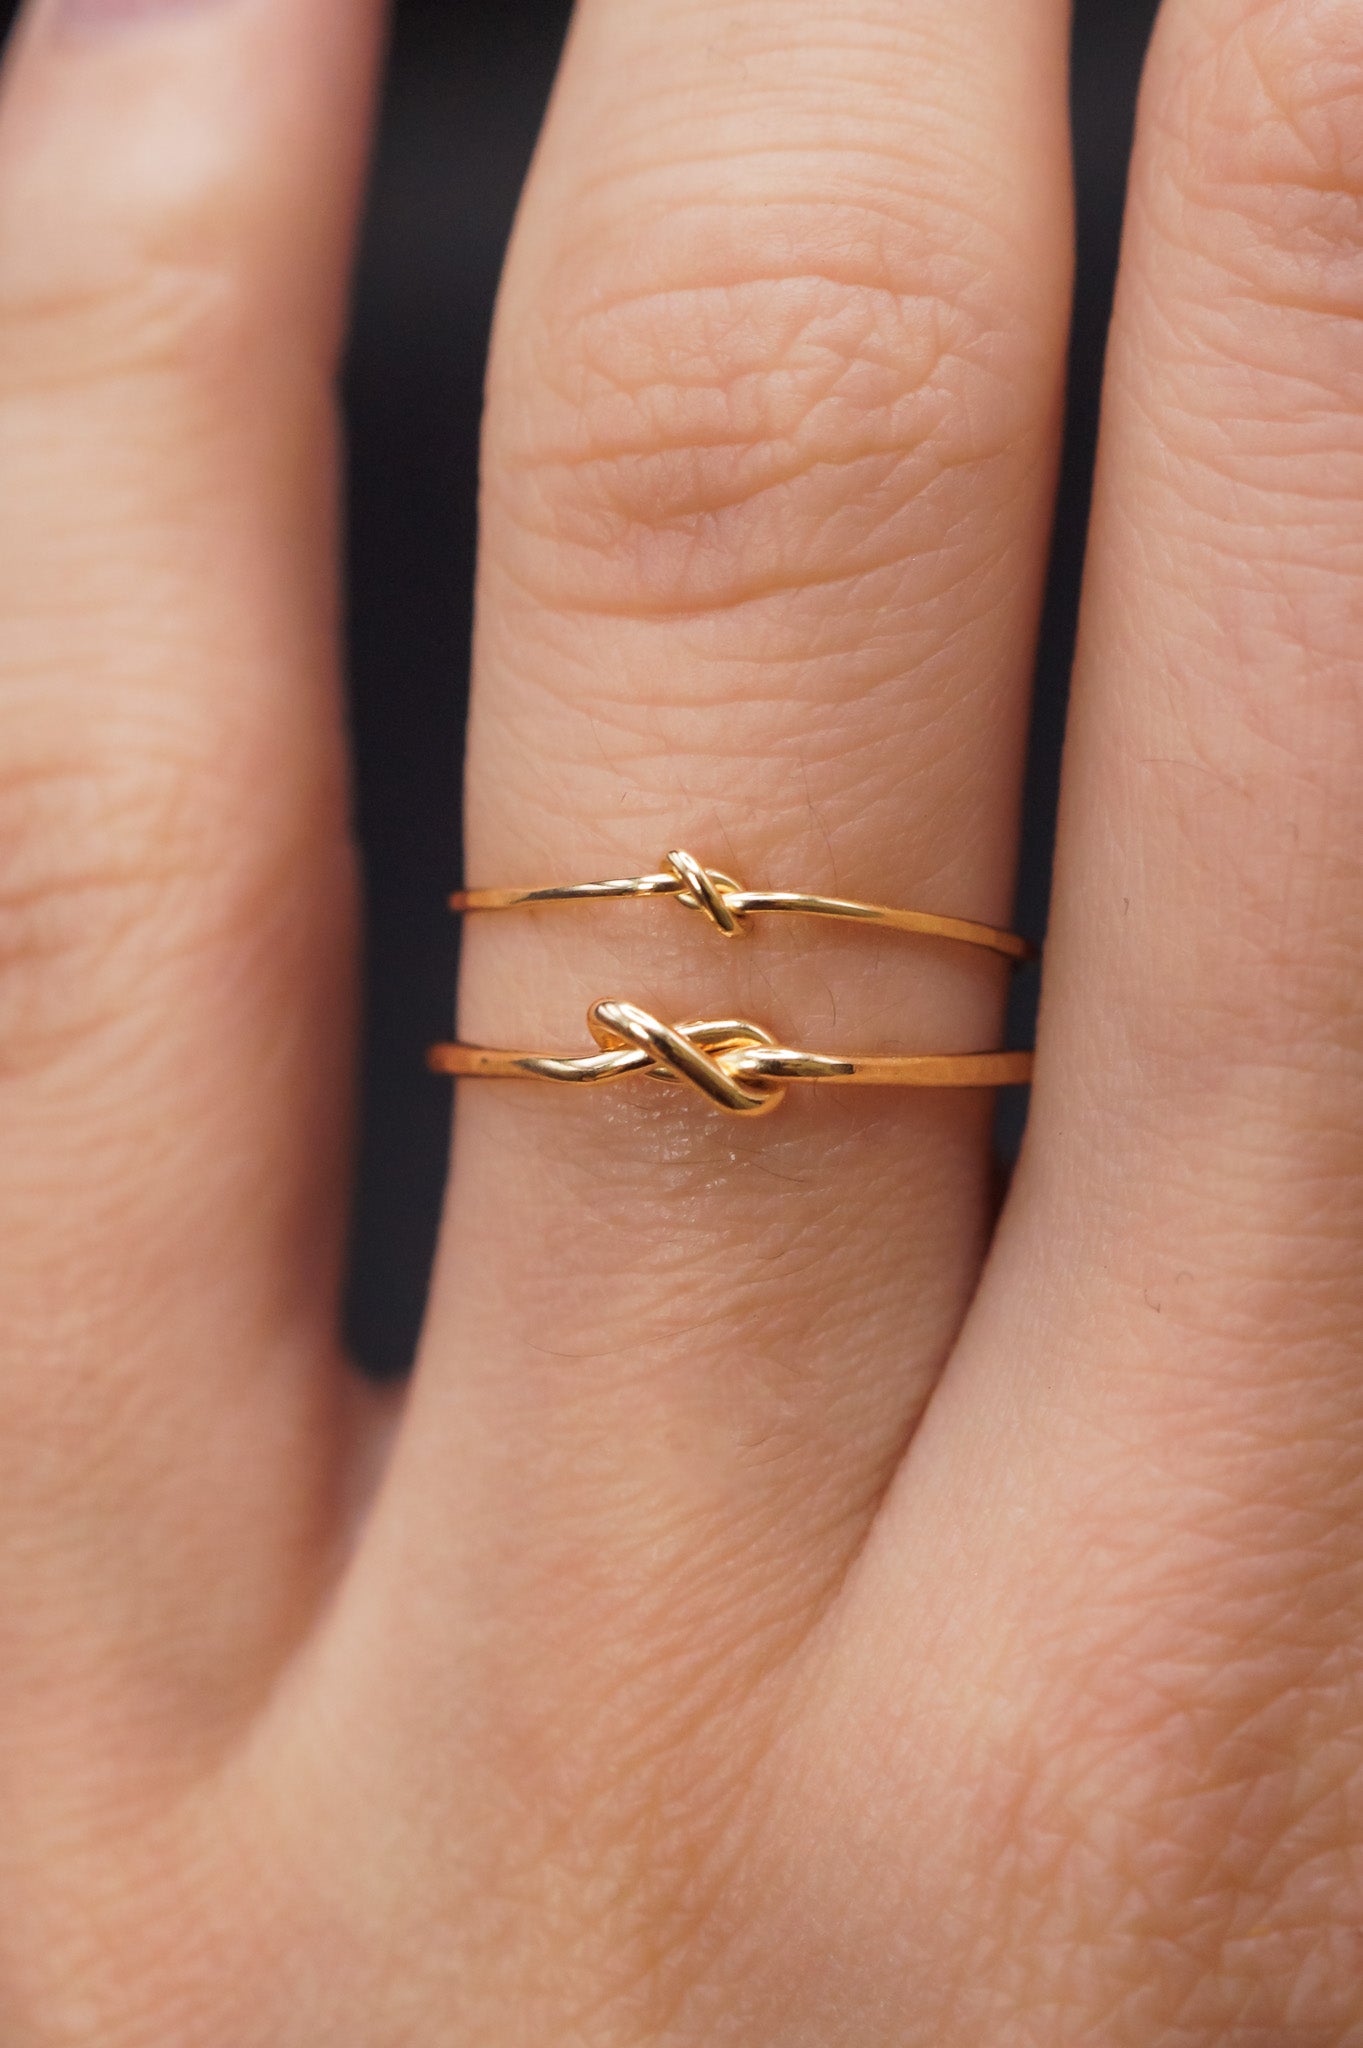 Modeled example of both the Thin and Thick Closed Knot Ring in 14k Gold Fill on ring finger.